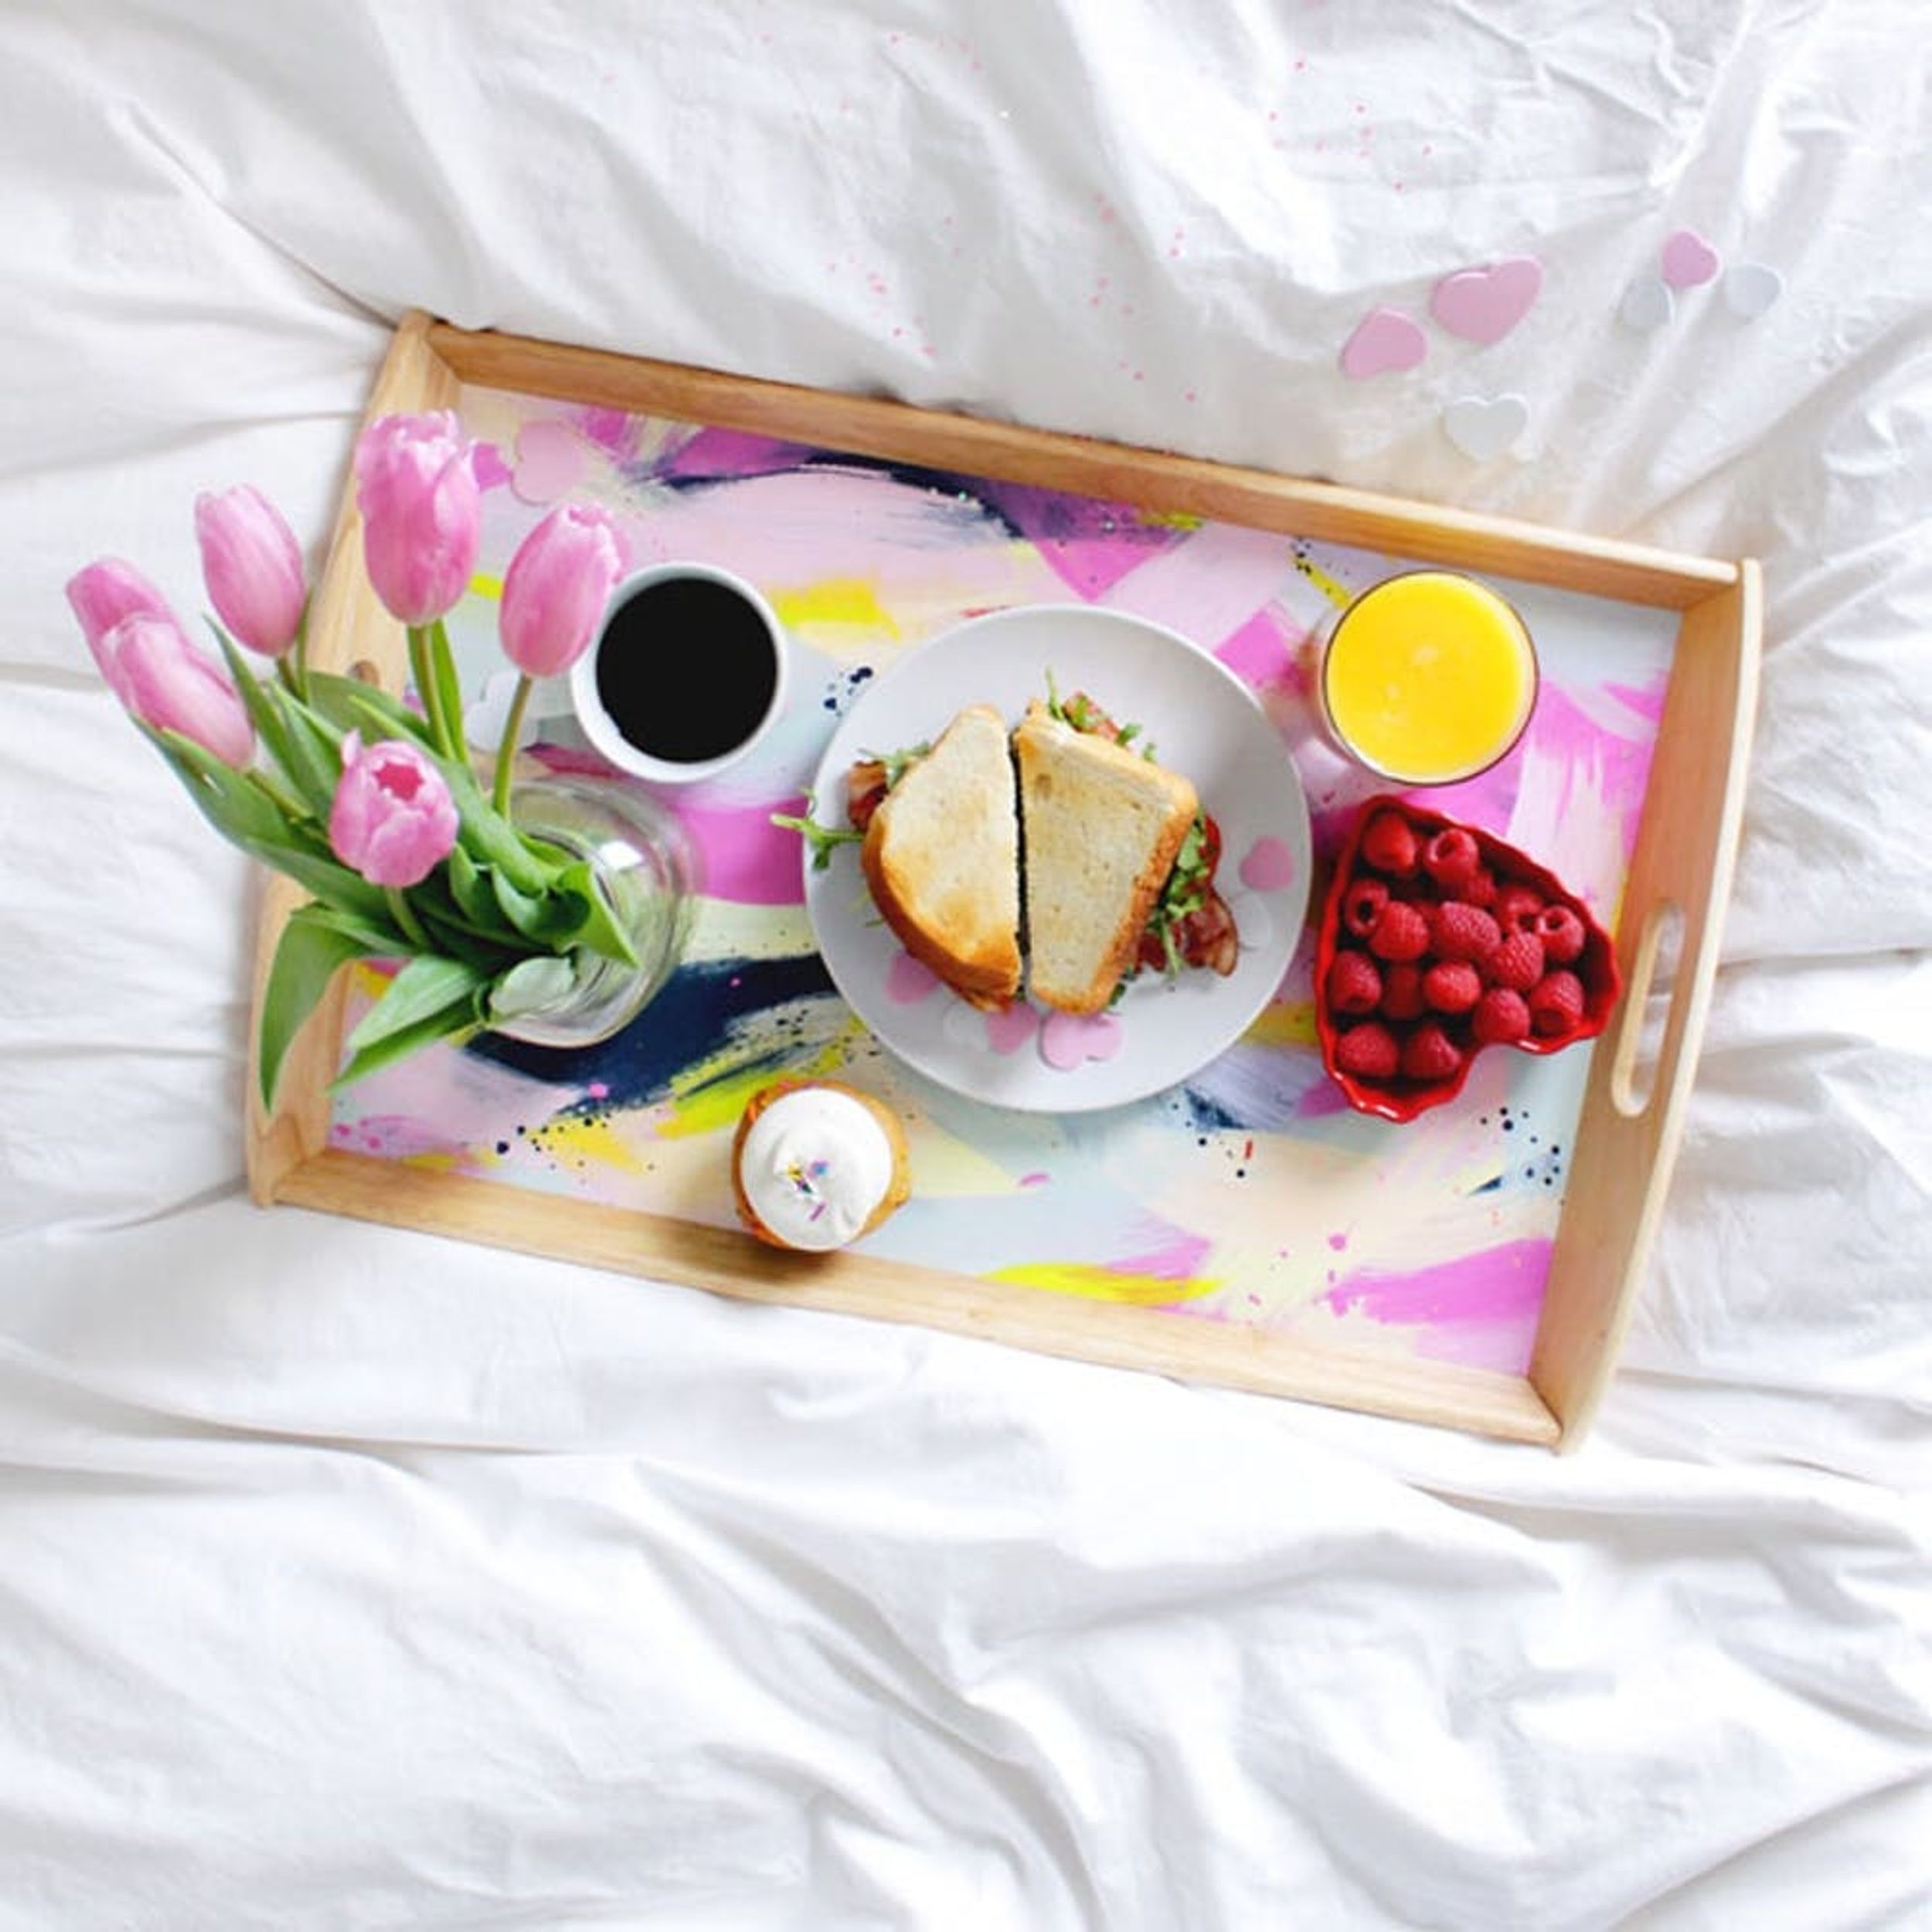 How to DIY a Valentine’s Day Breakfast in Bed Tray